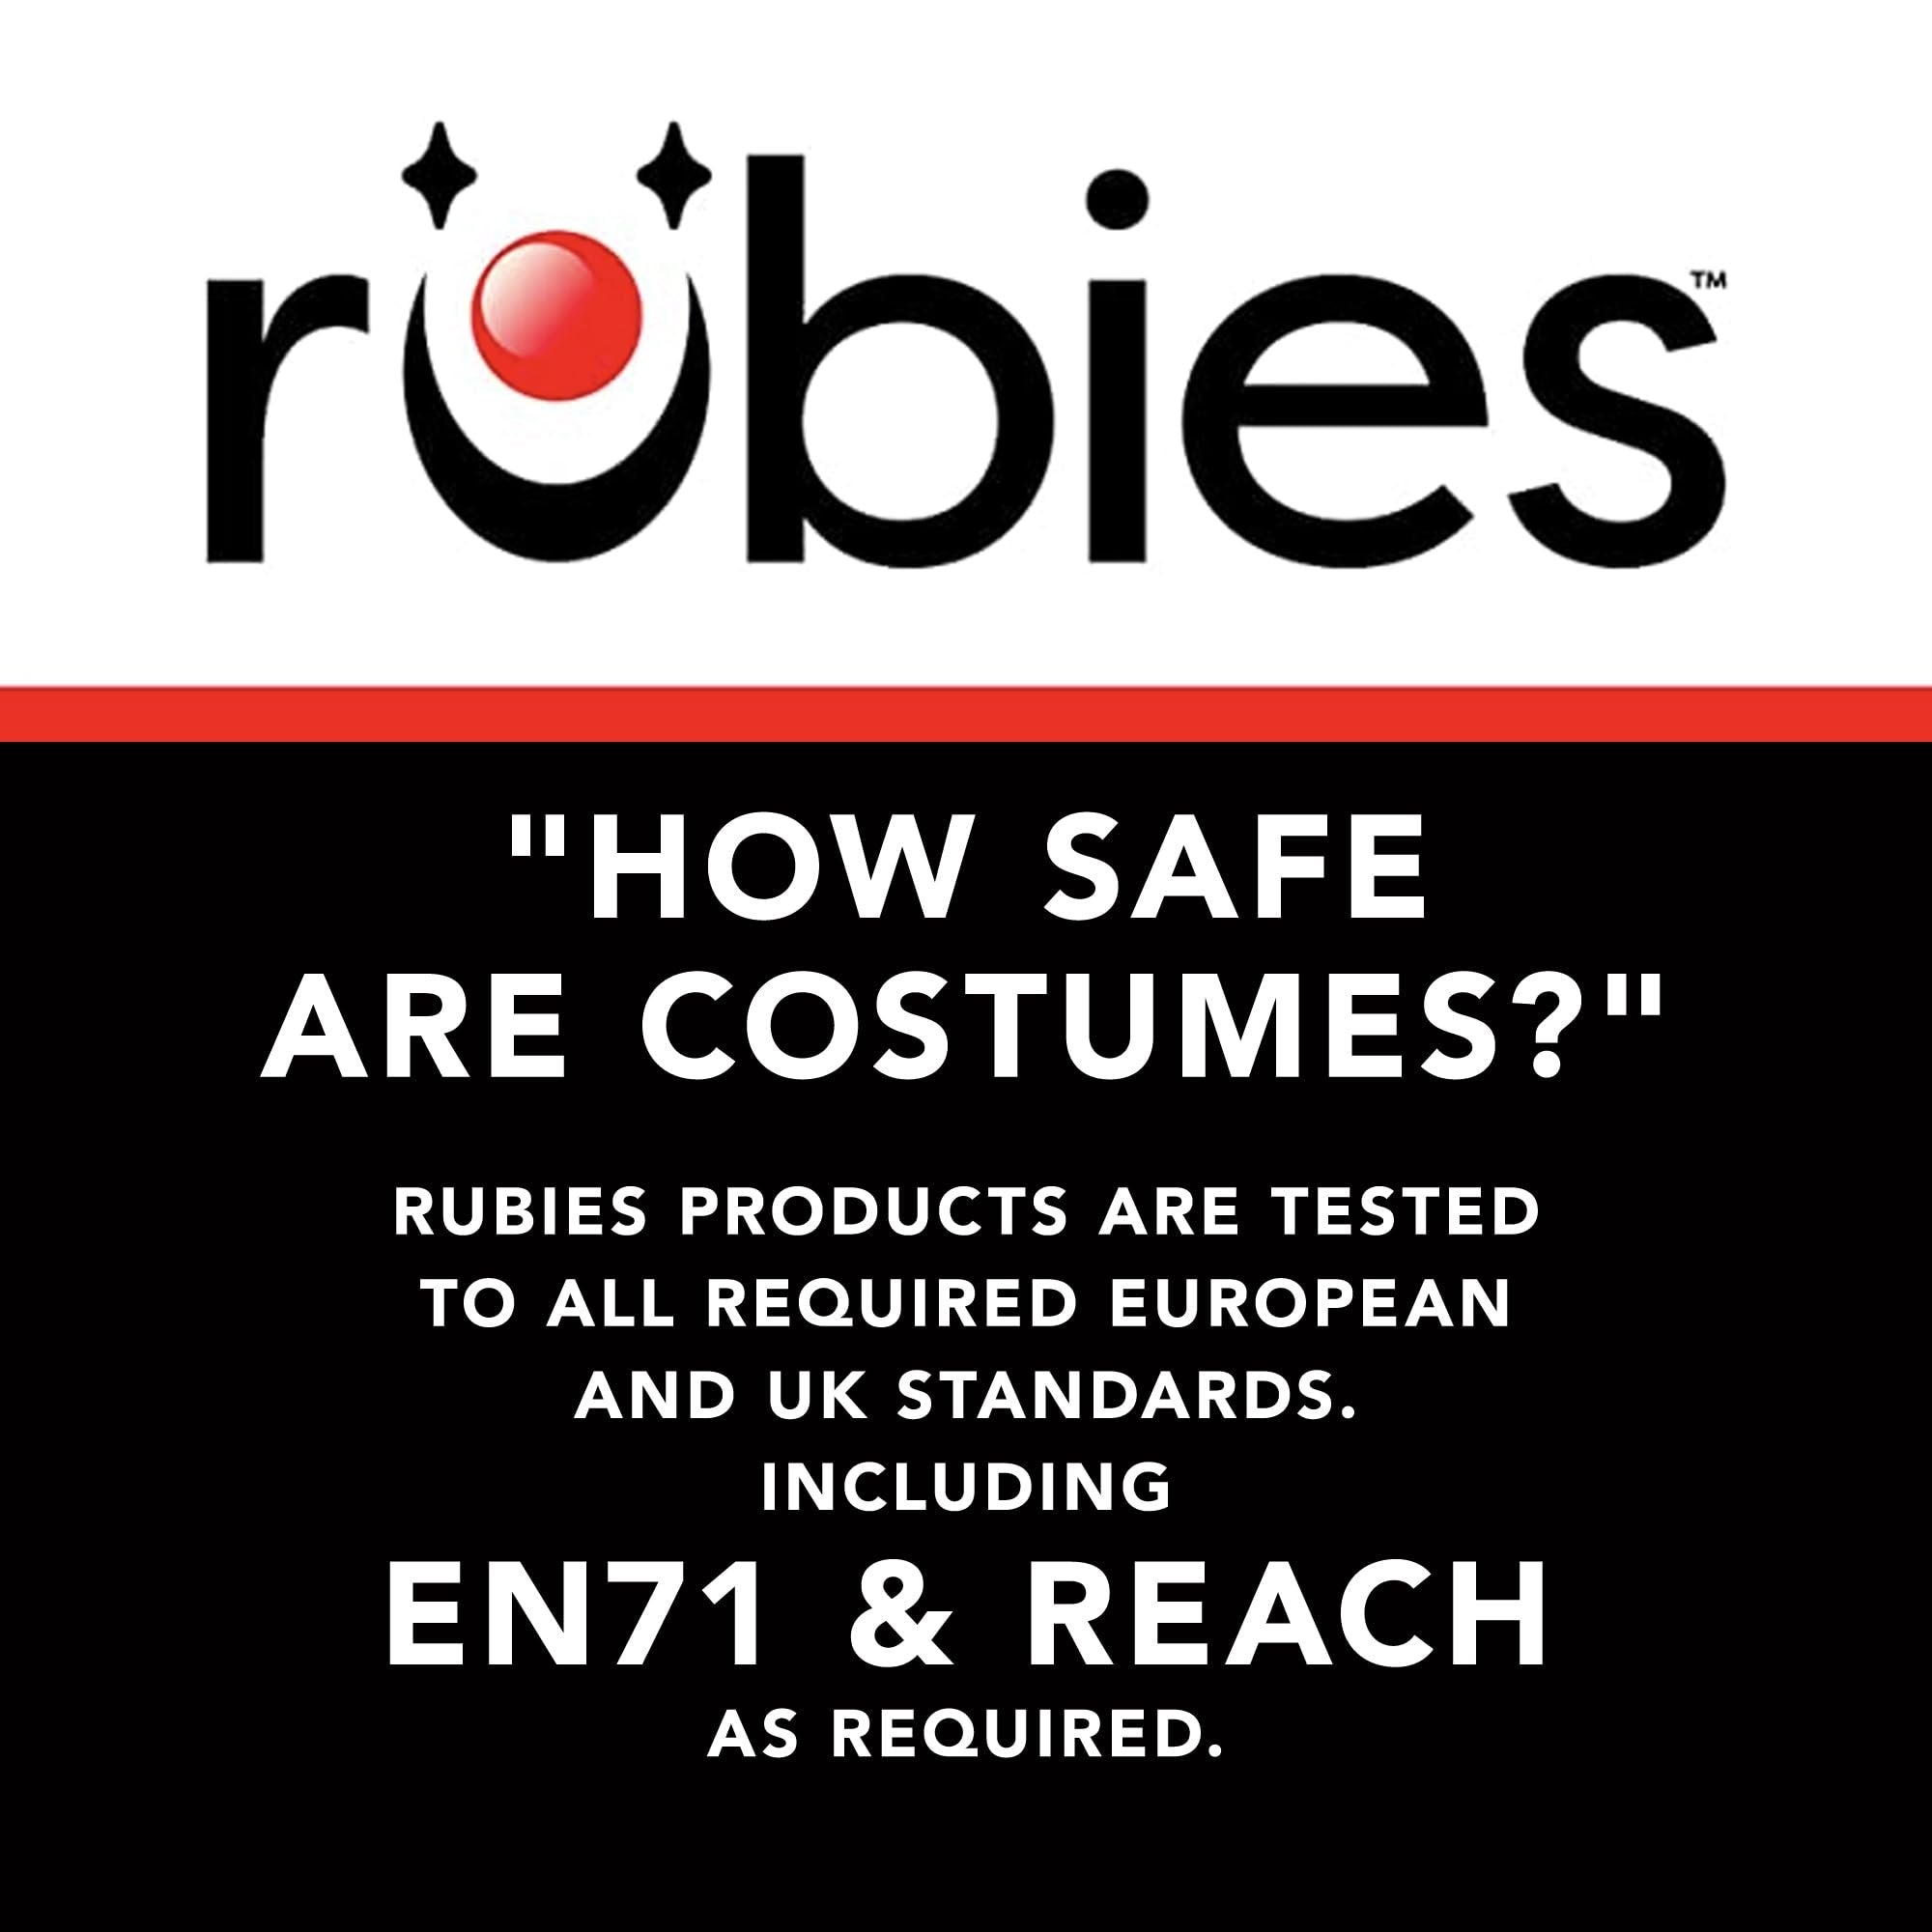 Rubie's Men's Opus Collection Pirate Captain Costume, As Shown, Standard